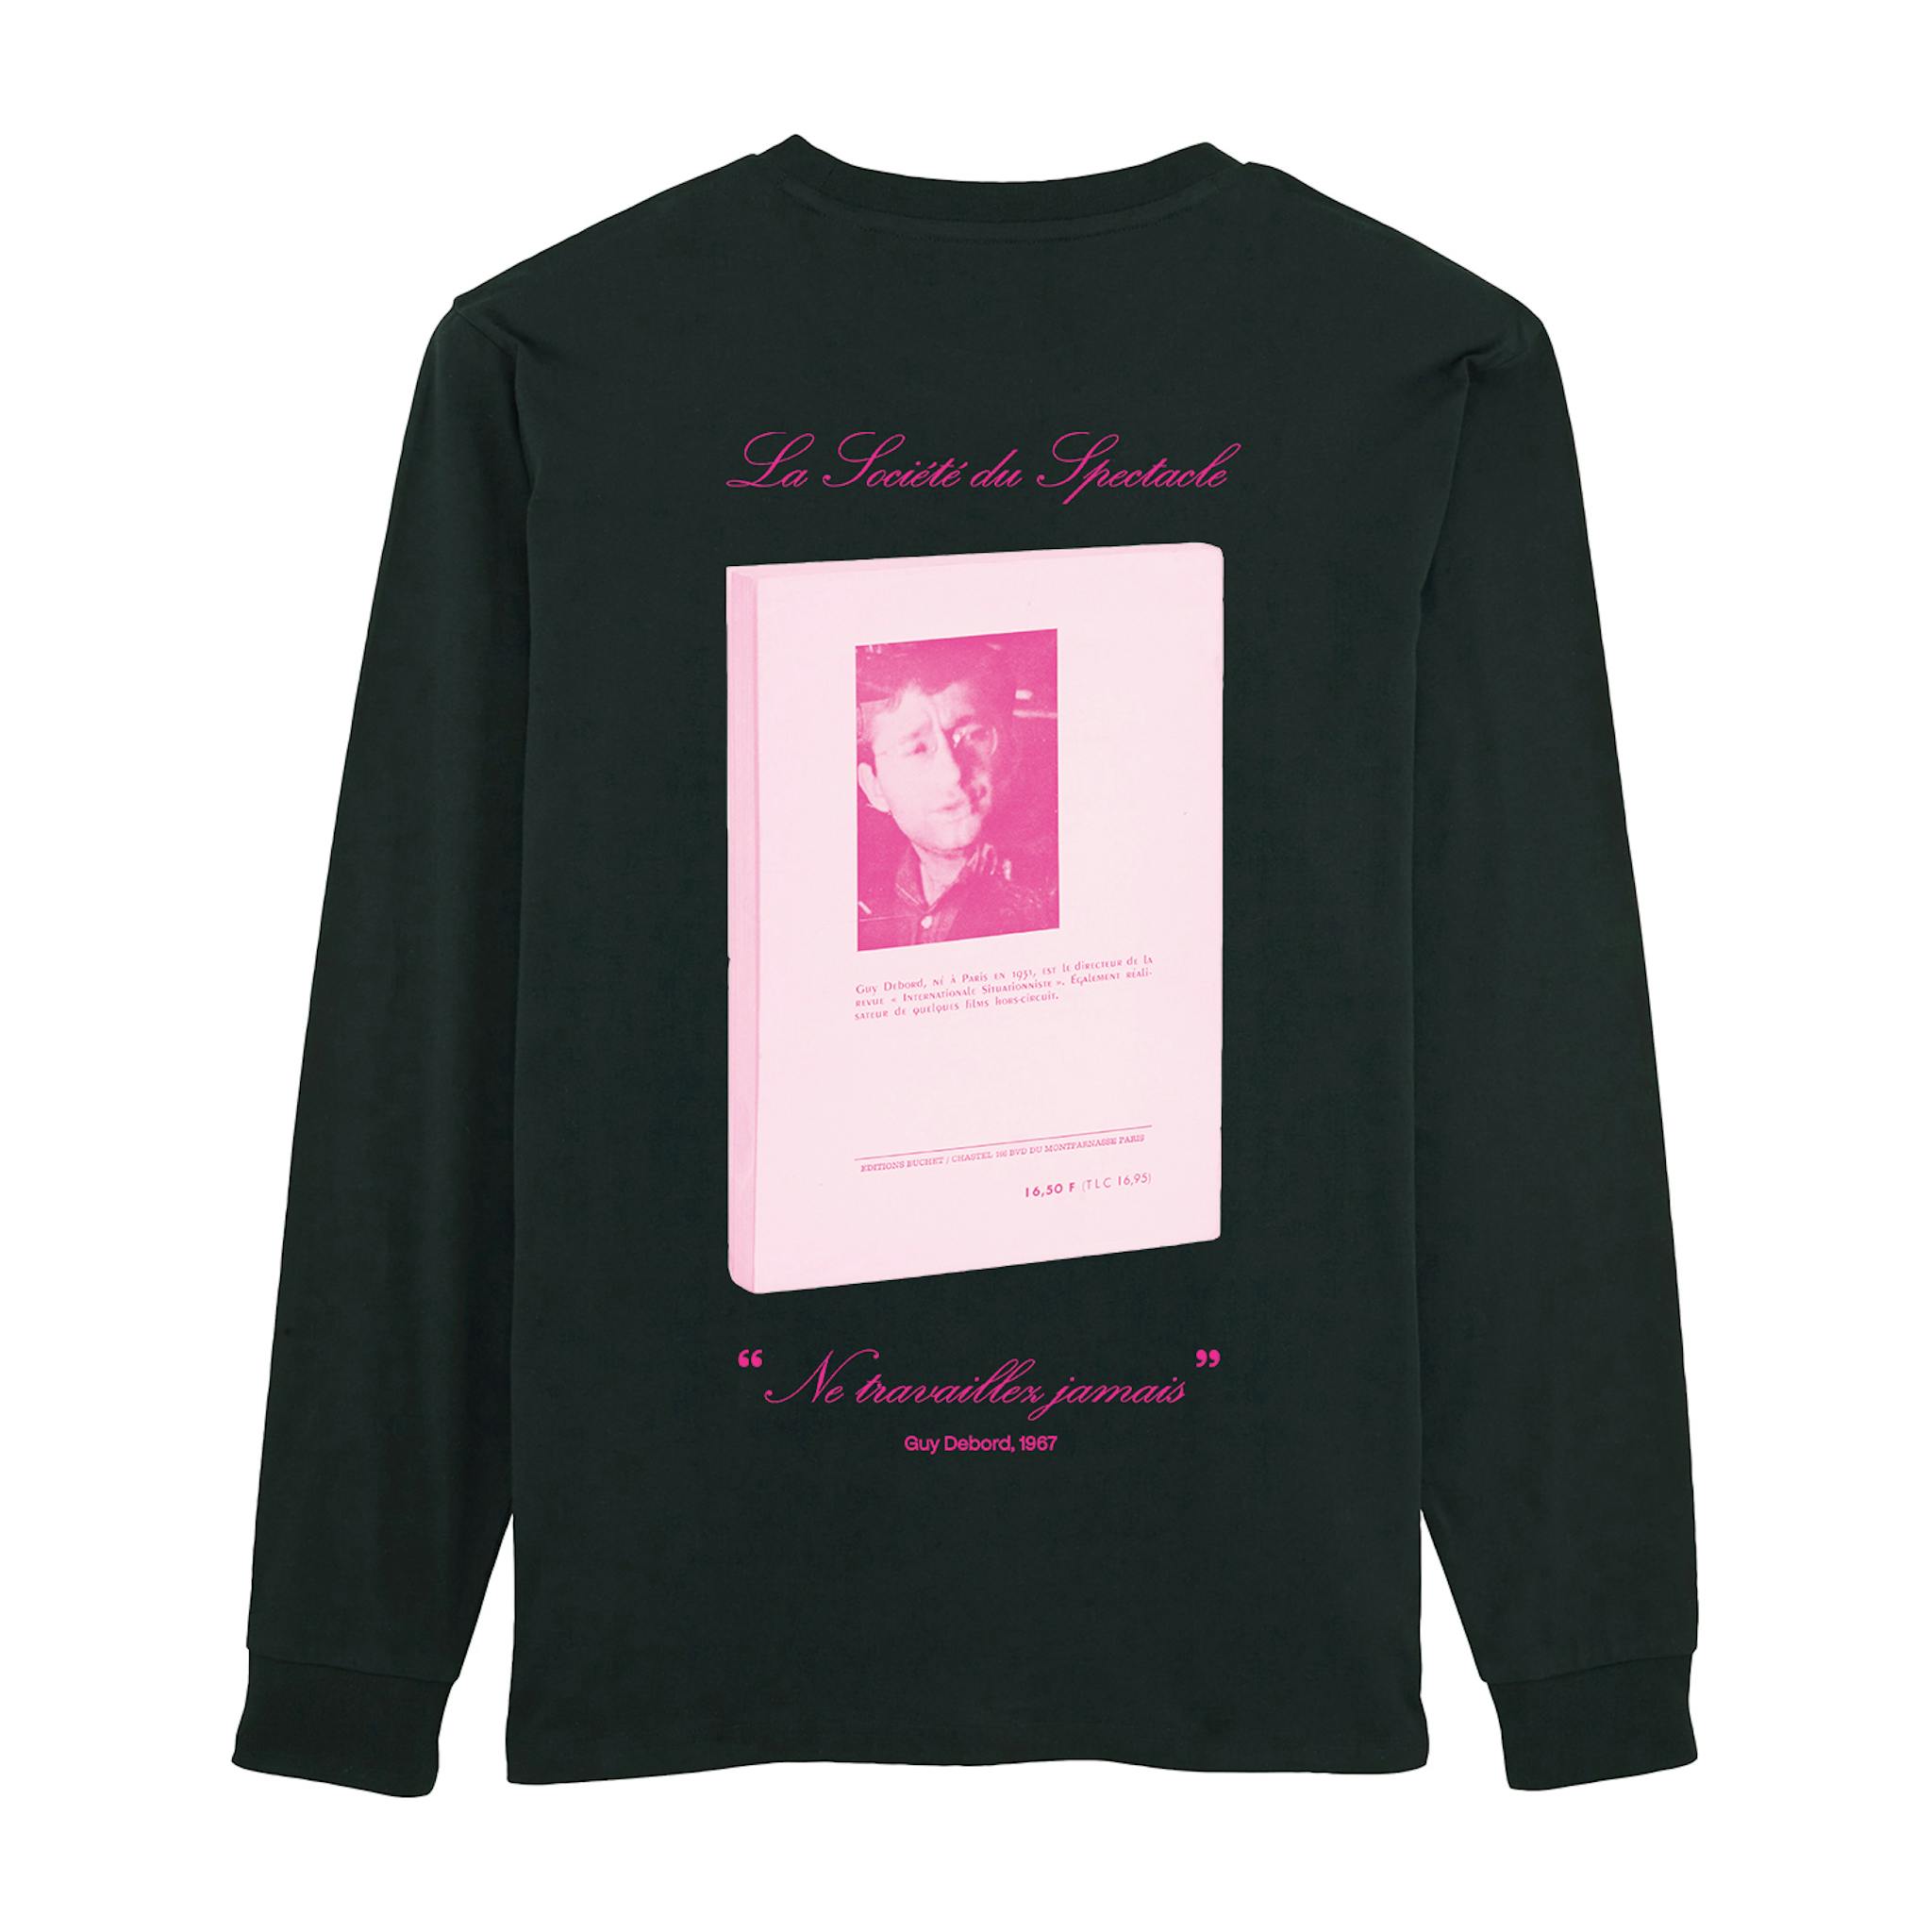 A black long-sleeve T-shirt with large pink book graphic on the back and french words over and underneath.